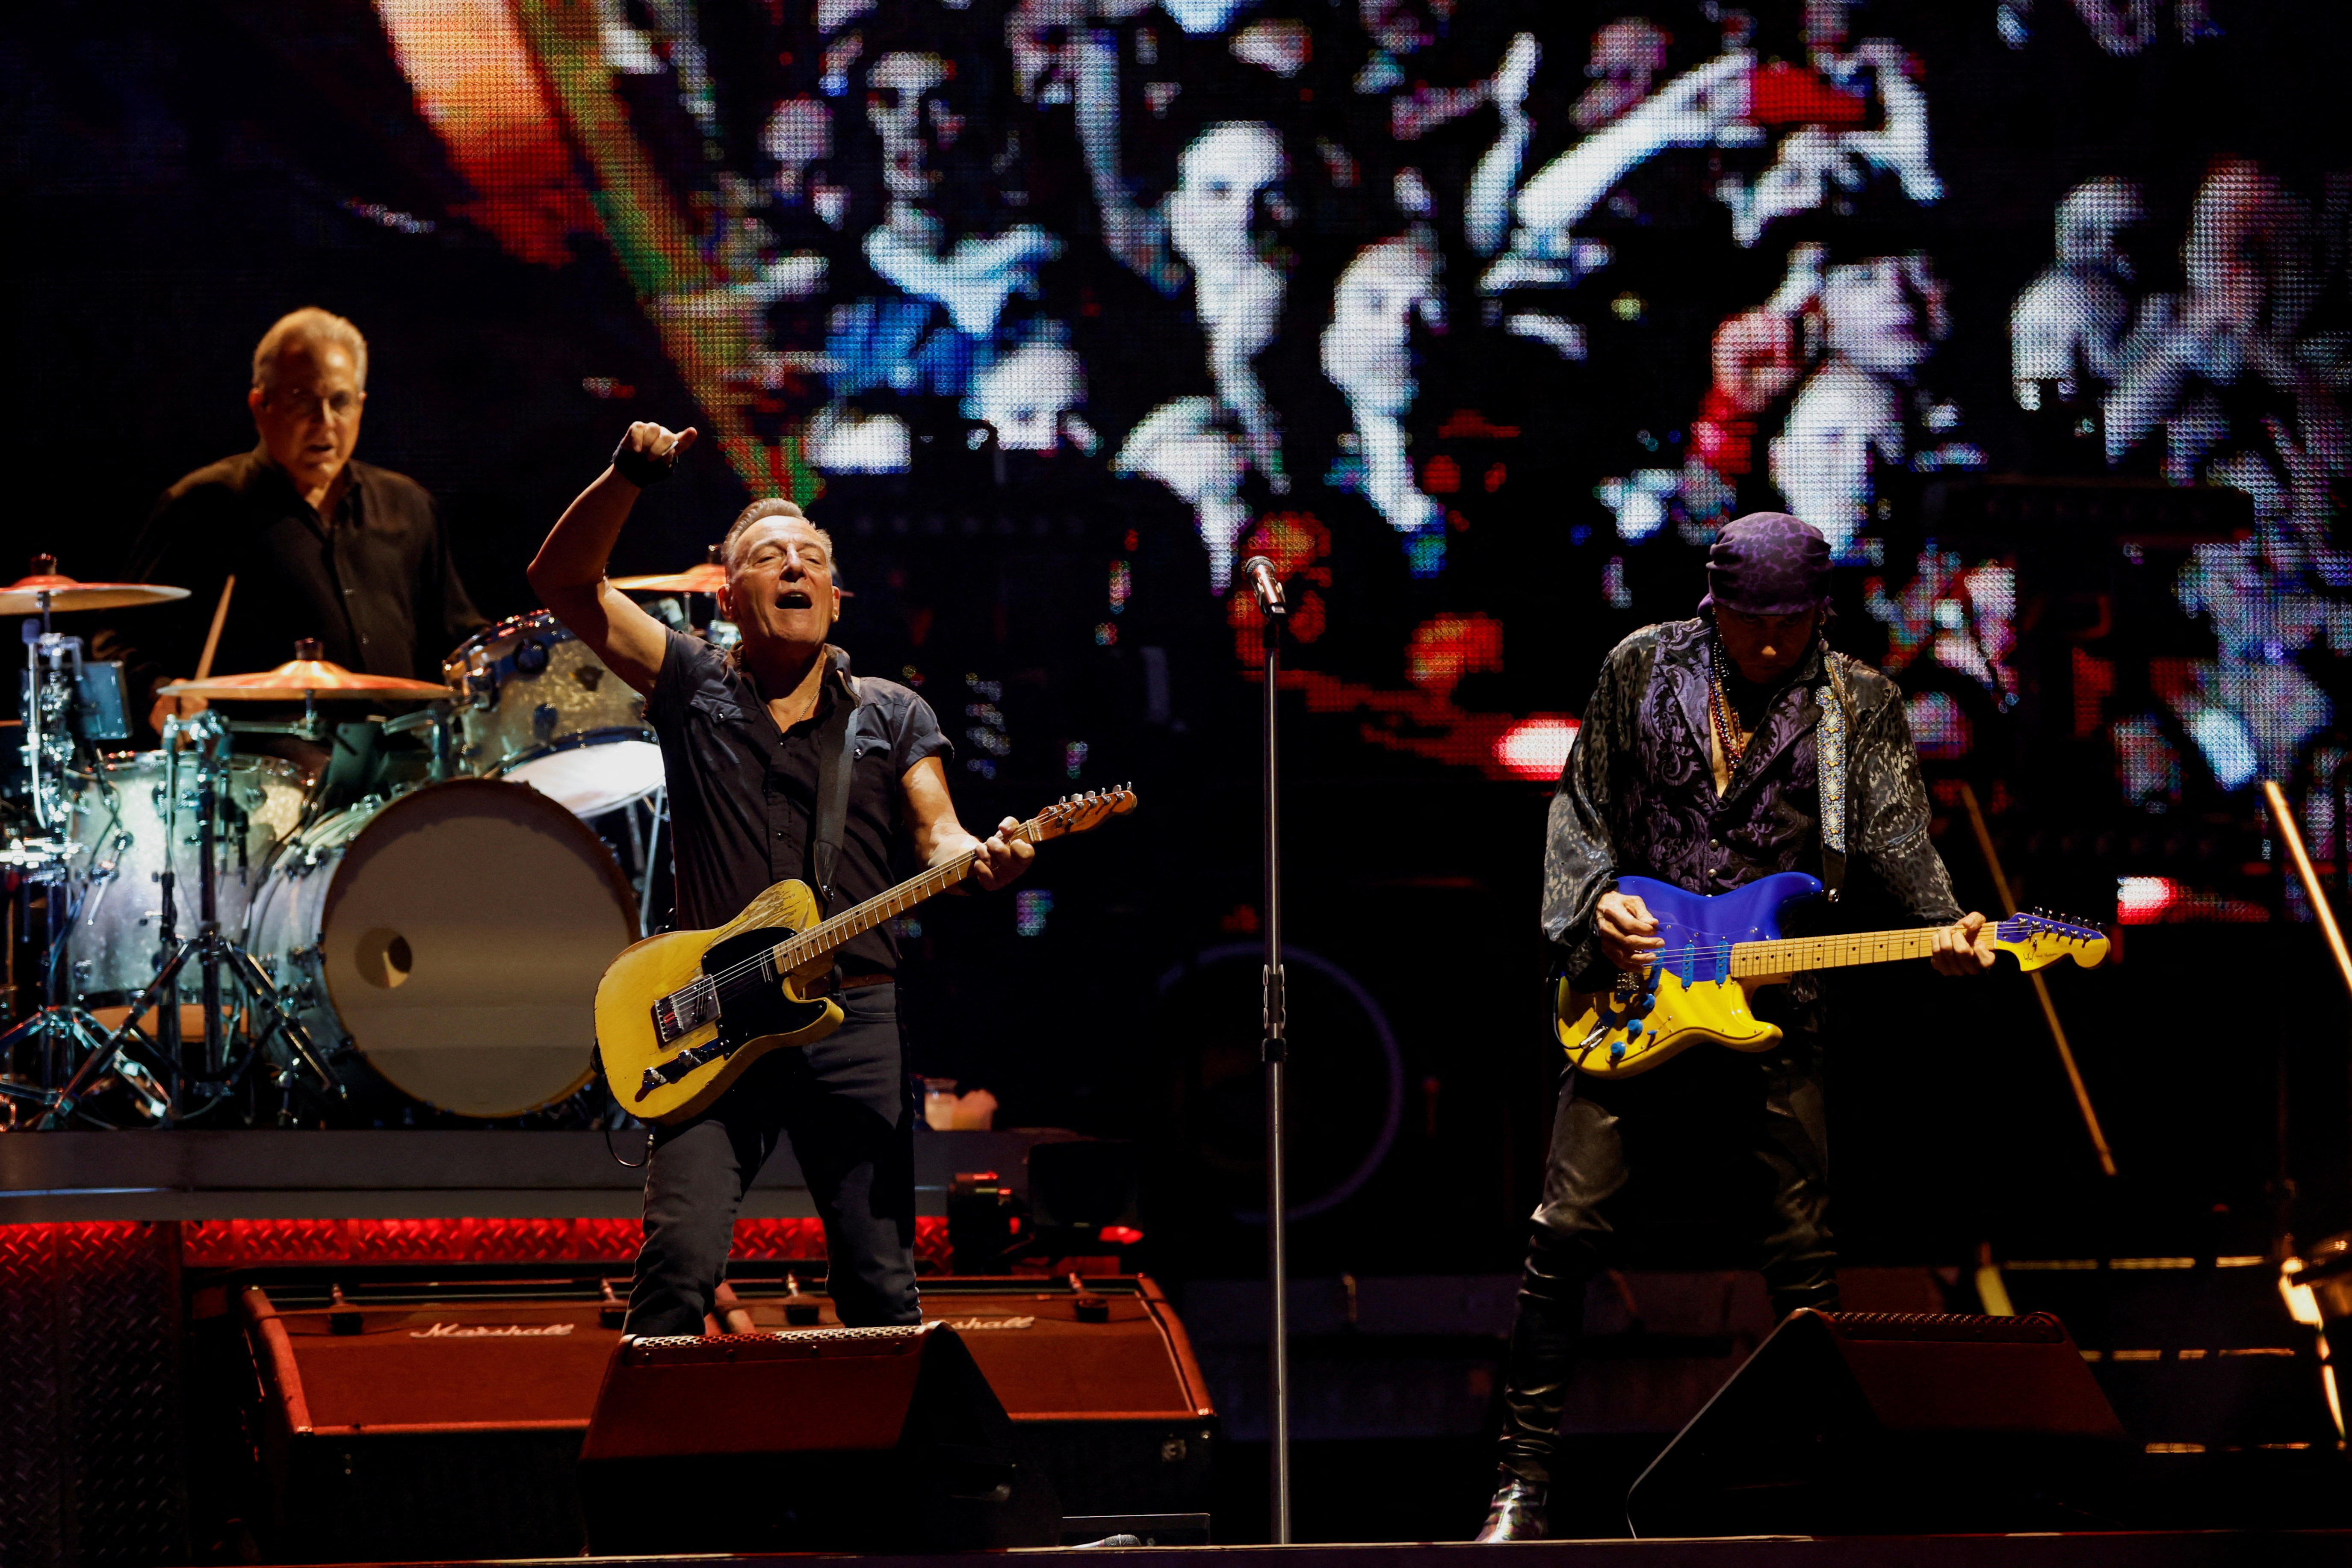 American rock star Bruce Springsteen and The E Street band perform during a concert of their European tour at the Estadi Olímpic Lluis Companys in Barcelona.  REUTERS/Albert Gea/File Photo